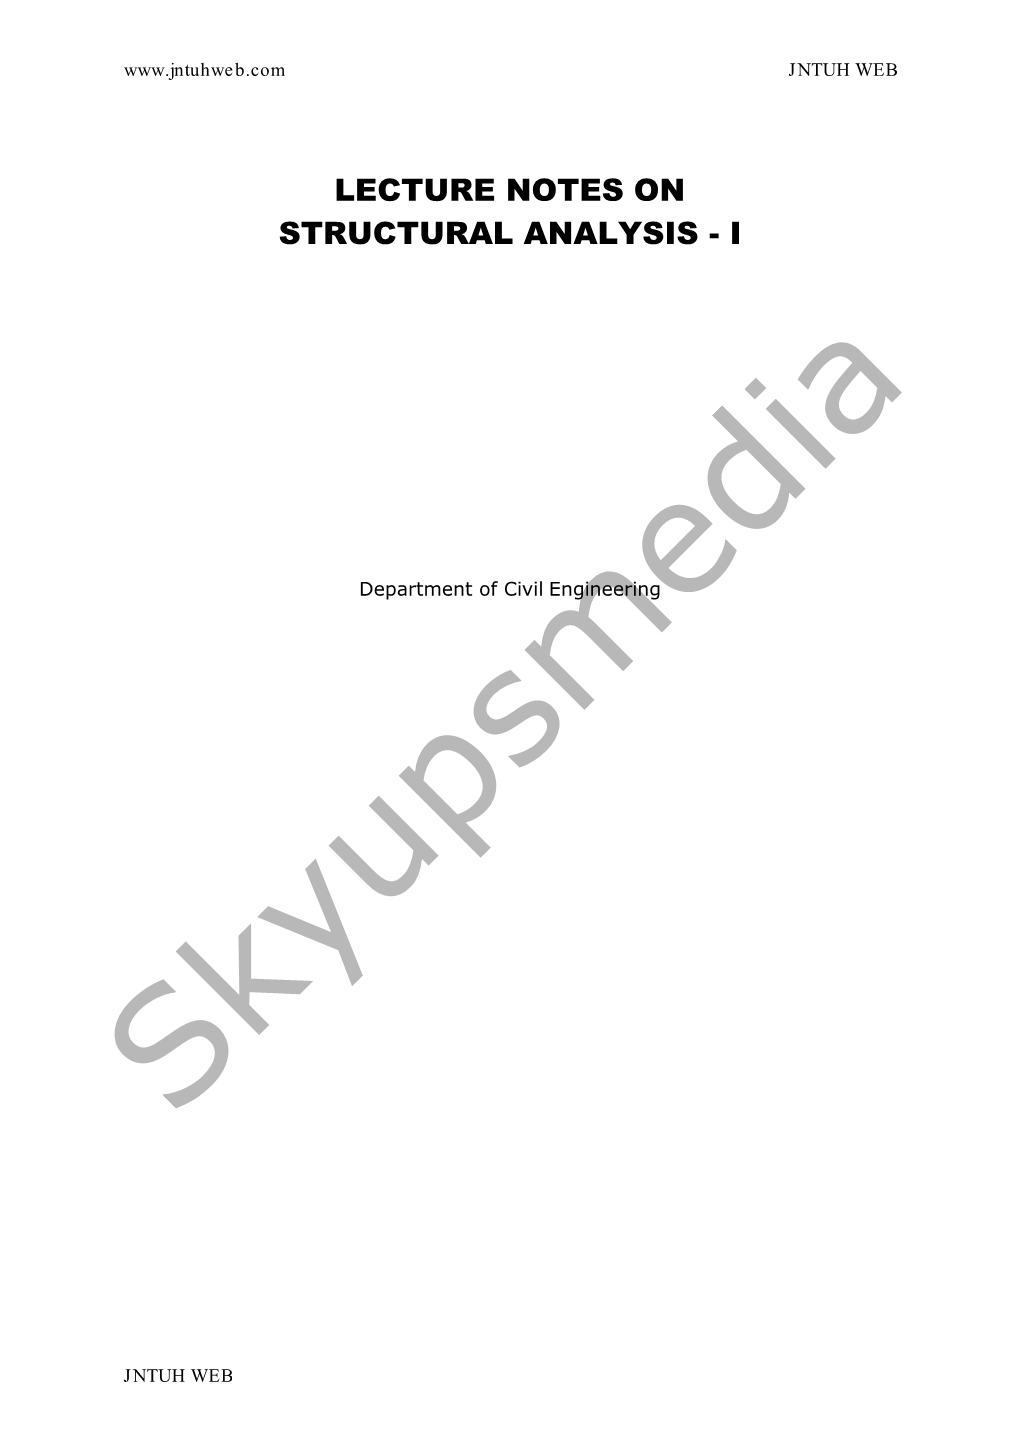 Lecture Notes on Structural Analysis - I